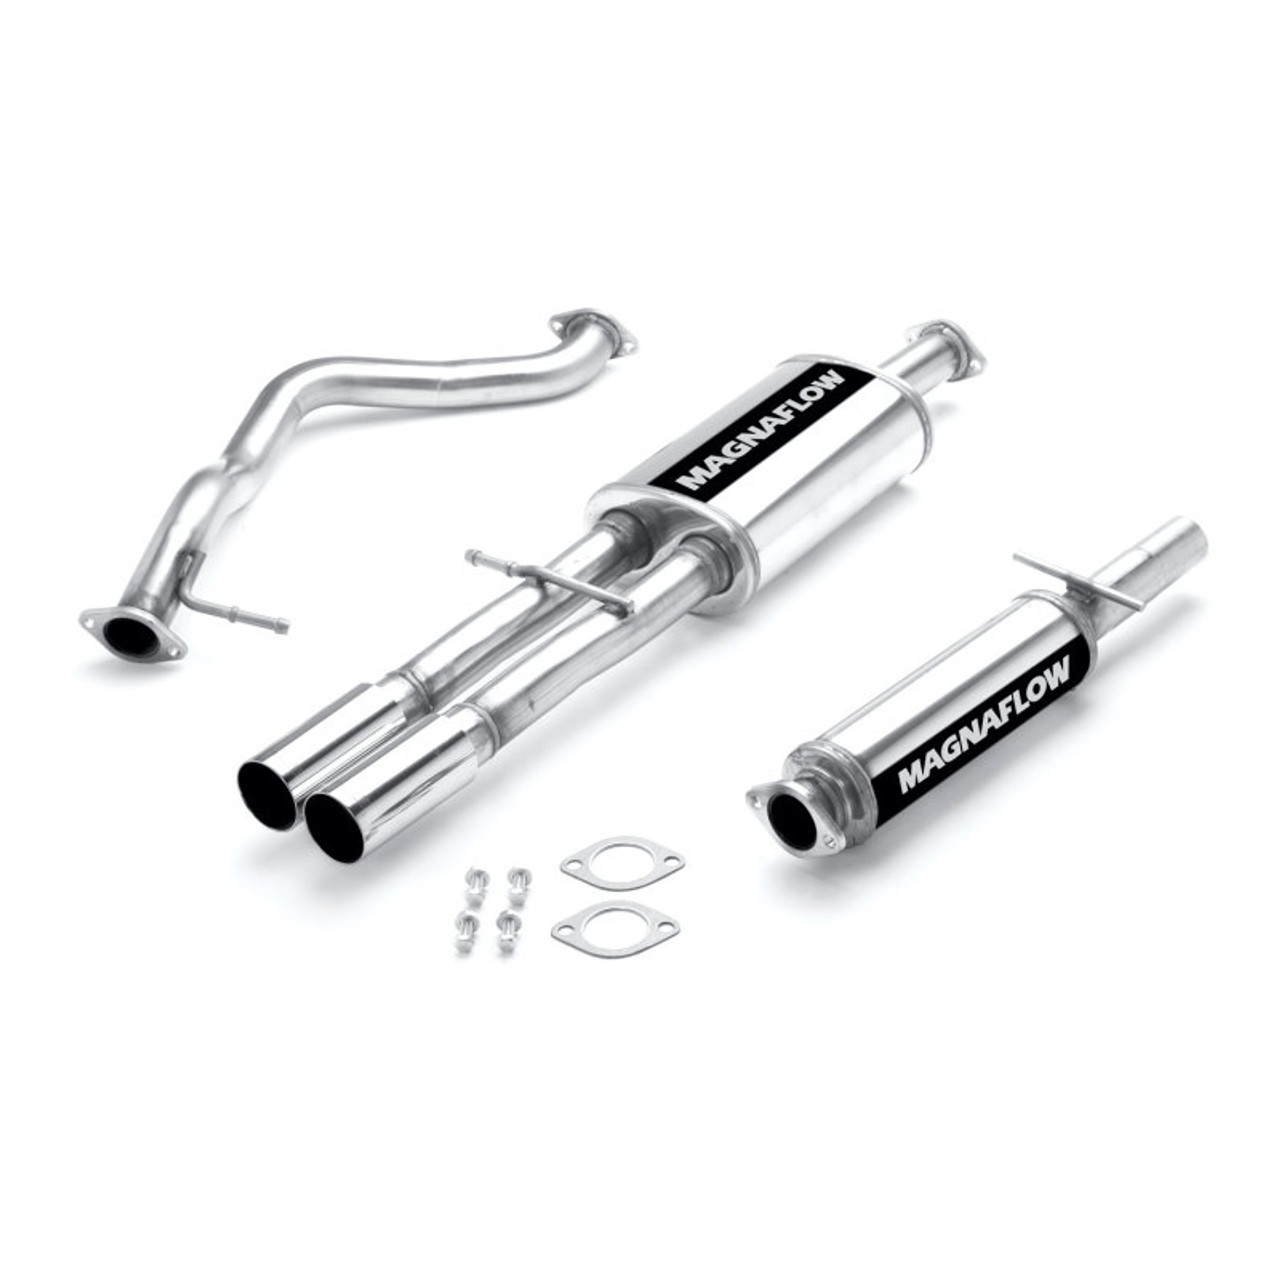 MagnaFlow 17109 Large Stainless Steel Performance Exhaust System Kit  クラシックな人気商品